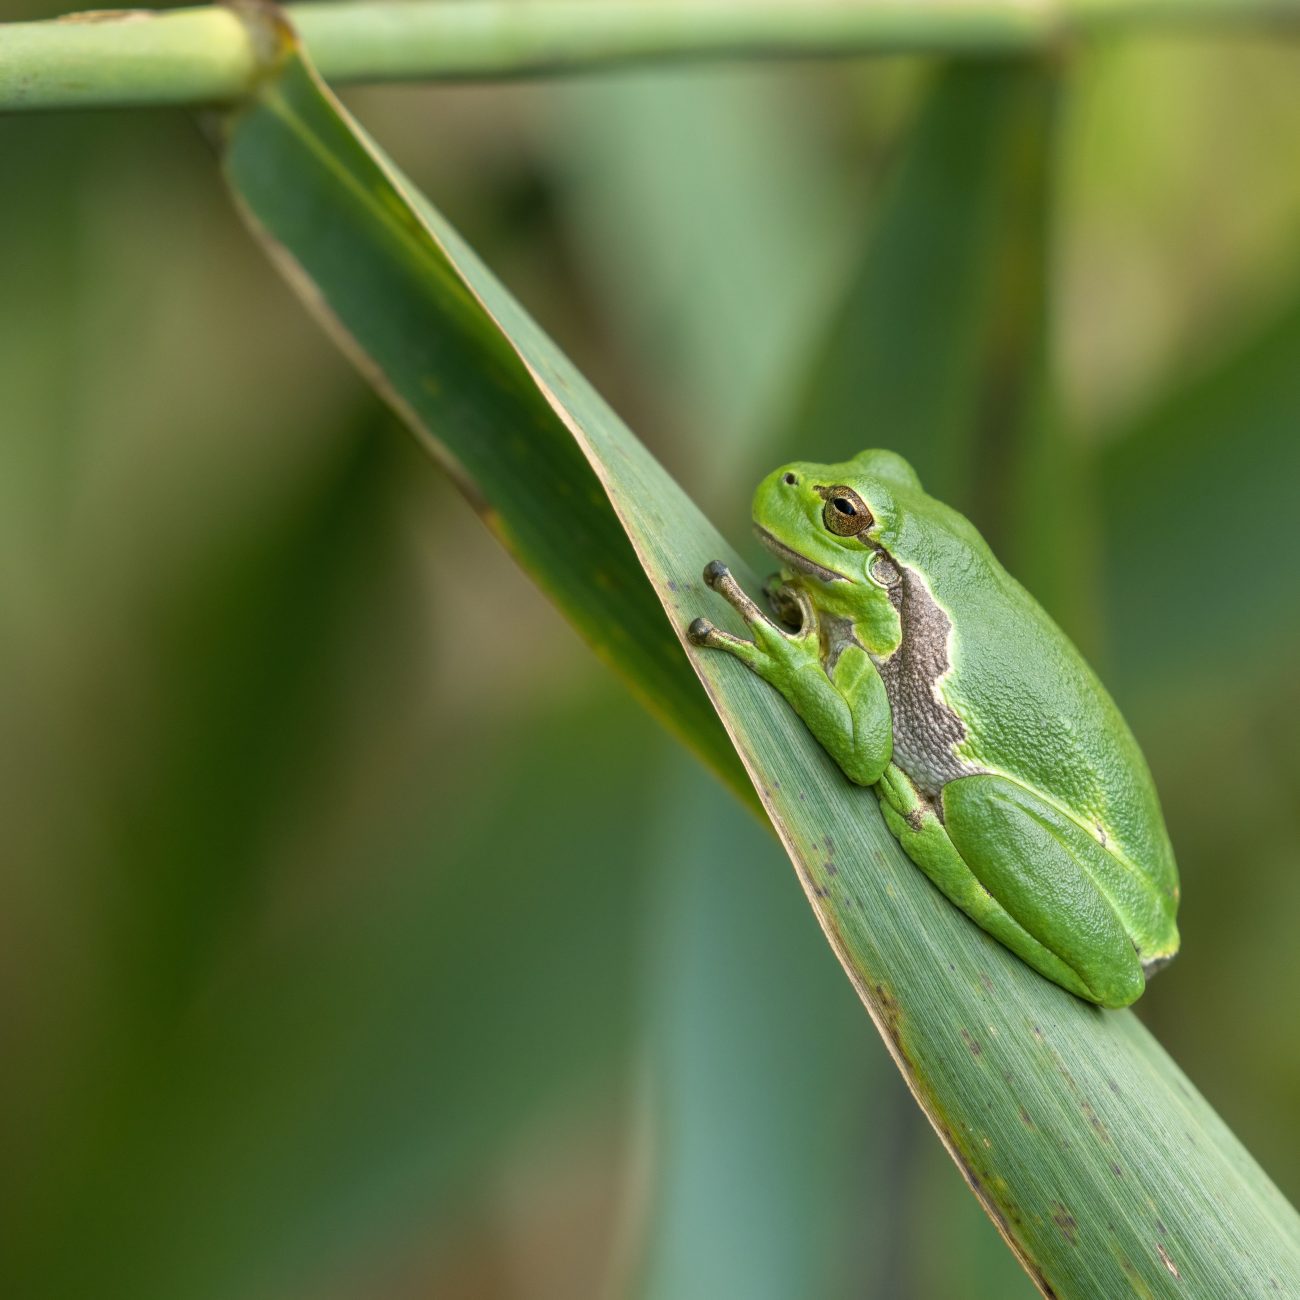 The European tree frog (Hyla arborea) is one of three amphibians native to Cyprus